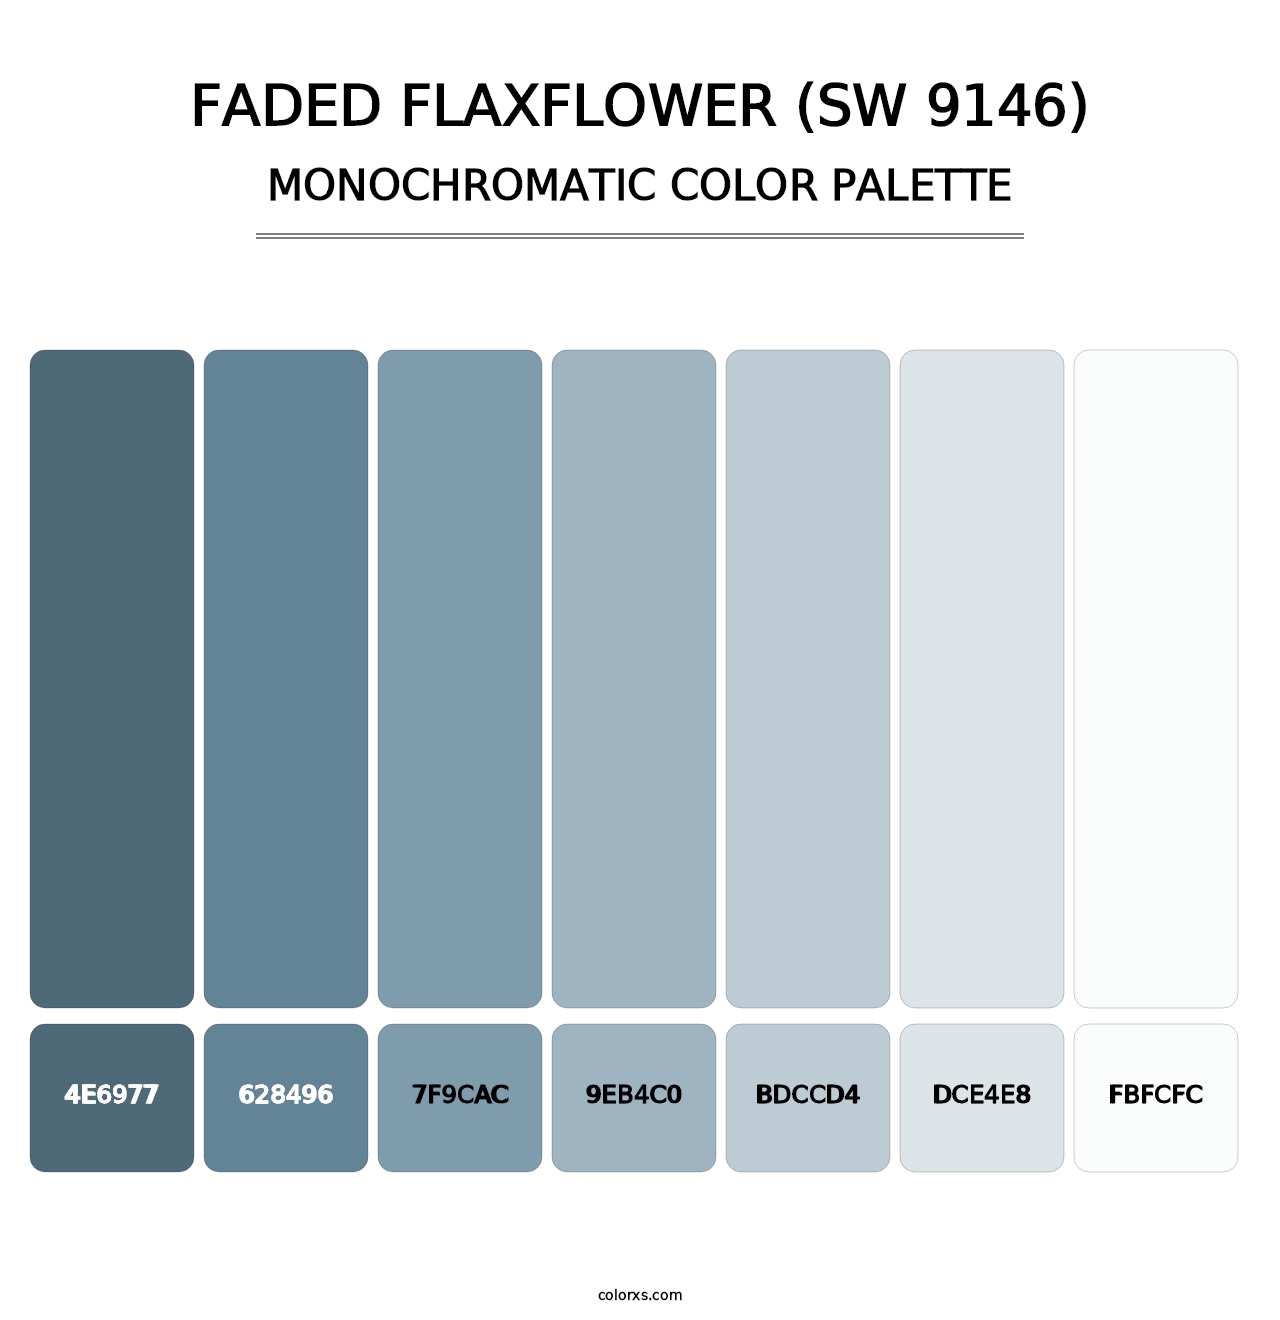 Faded Flaxflower (SW 9146) - Monochromatic Color Palette